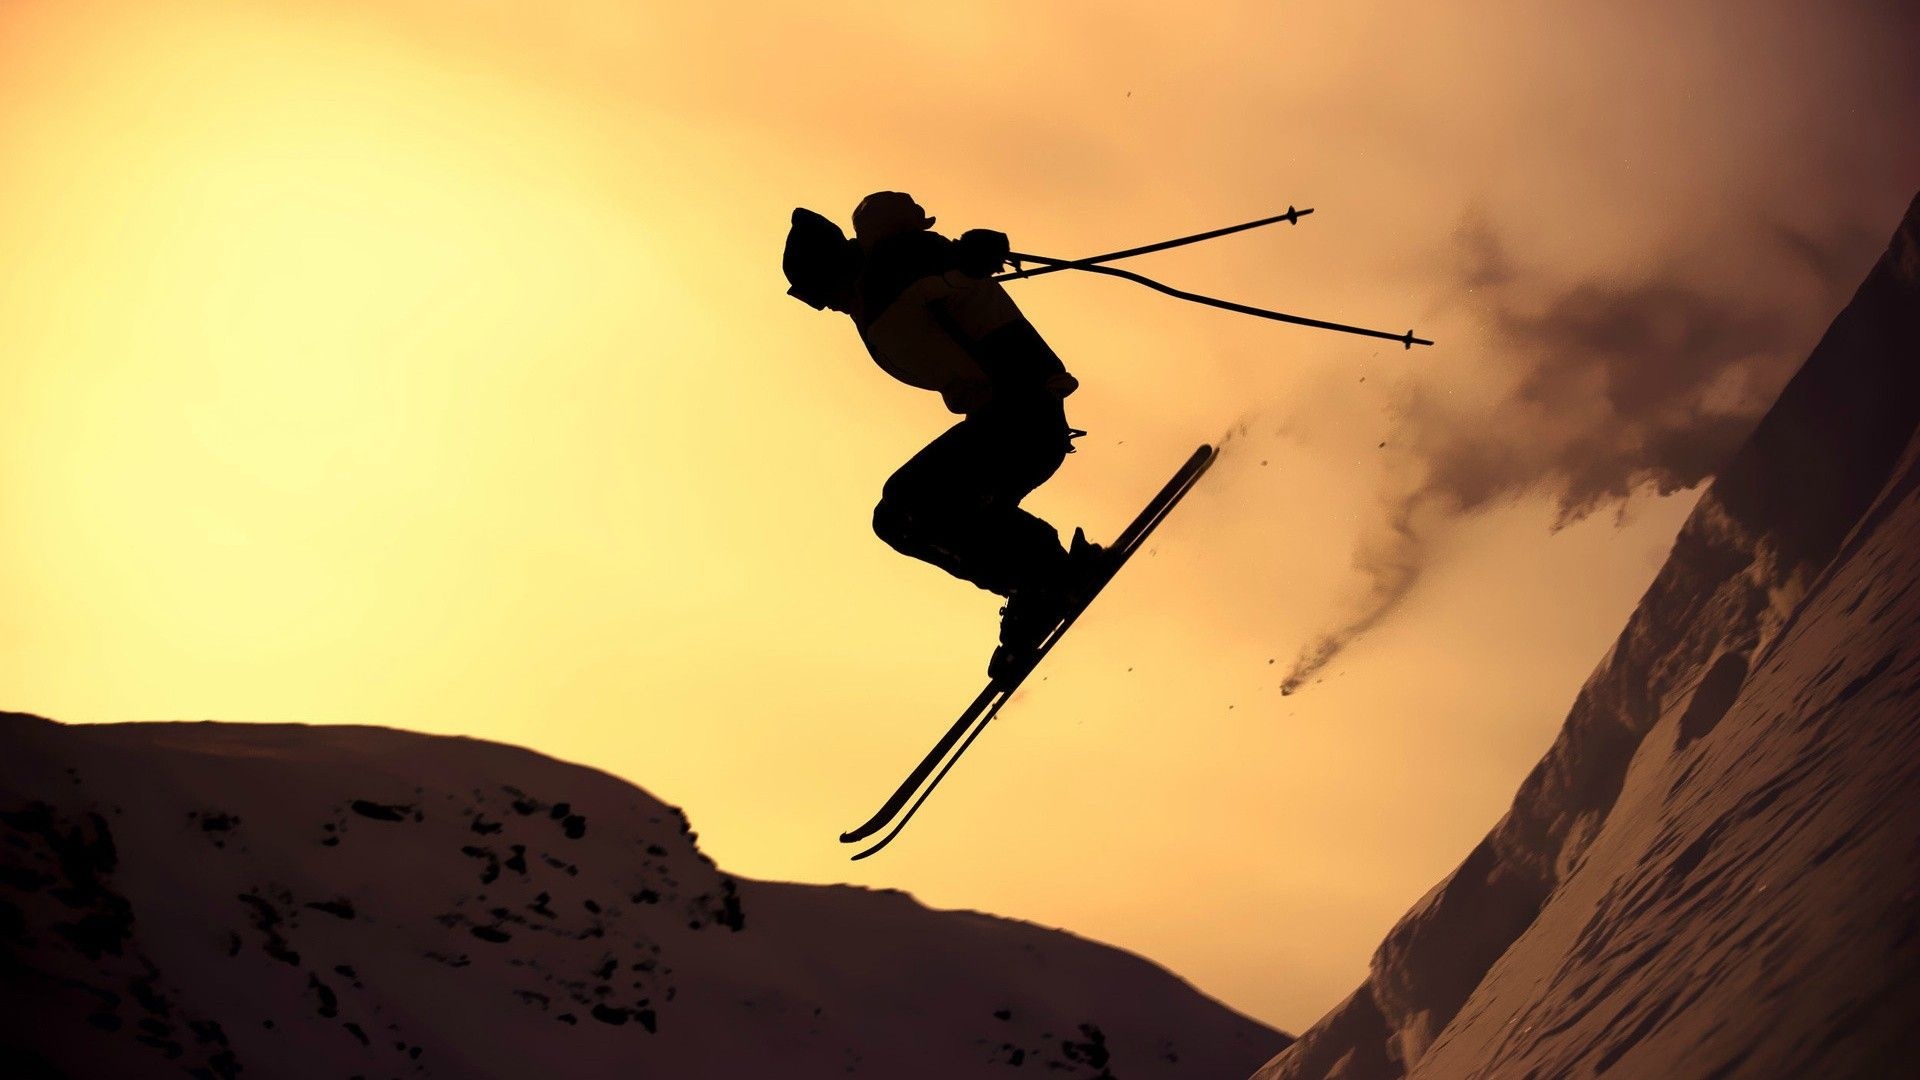 Alpine Skiing: Freestyle skiing, Downhill, Winter sports, Ski jumping, Extreme sports. 1920x1080 Full HD Background.